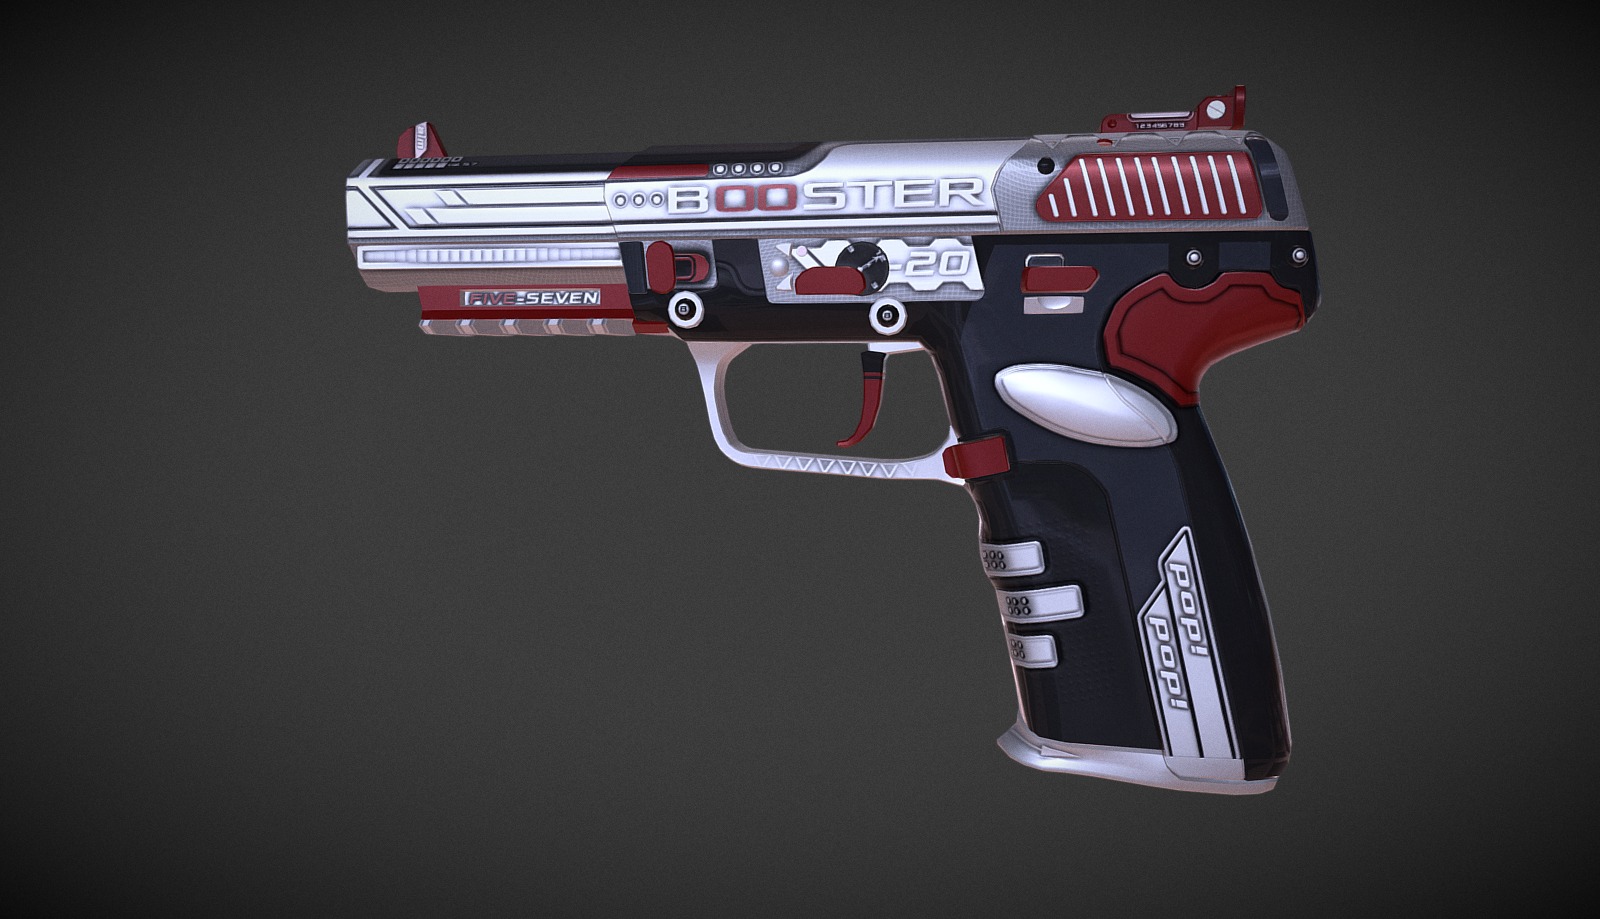 New pistol skin styled after cartoonish sci-fi. Inspirations from multiple skins from the workshop and in-game with my own personal touch and design. Wanted to keep things tighty and balanced while still providing a crisp clean design.

Steam Workshop Link: http://steamcommunity.com/sharedfiles/filedetails/?id=928963734 - Five-Seven | Power Booster - 3D model by ArchwayJones (@nubbyboy1) 3d model